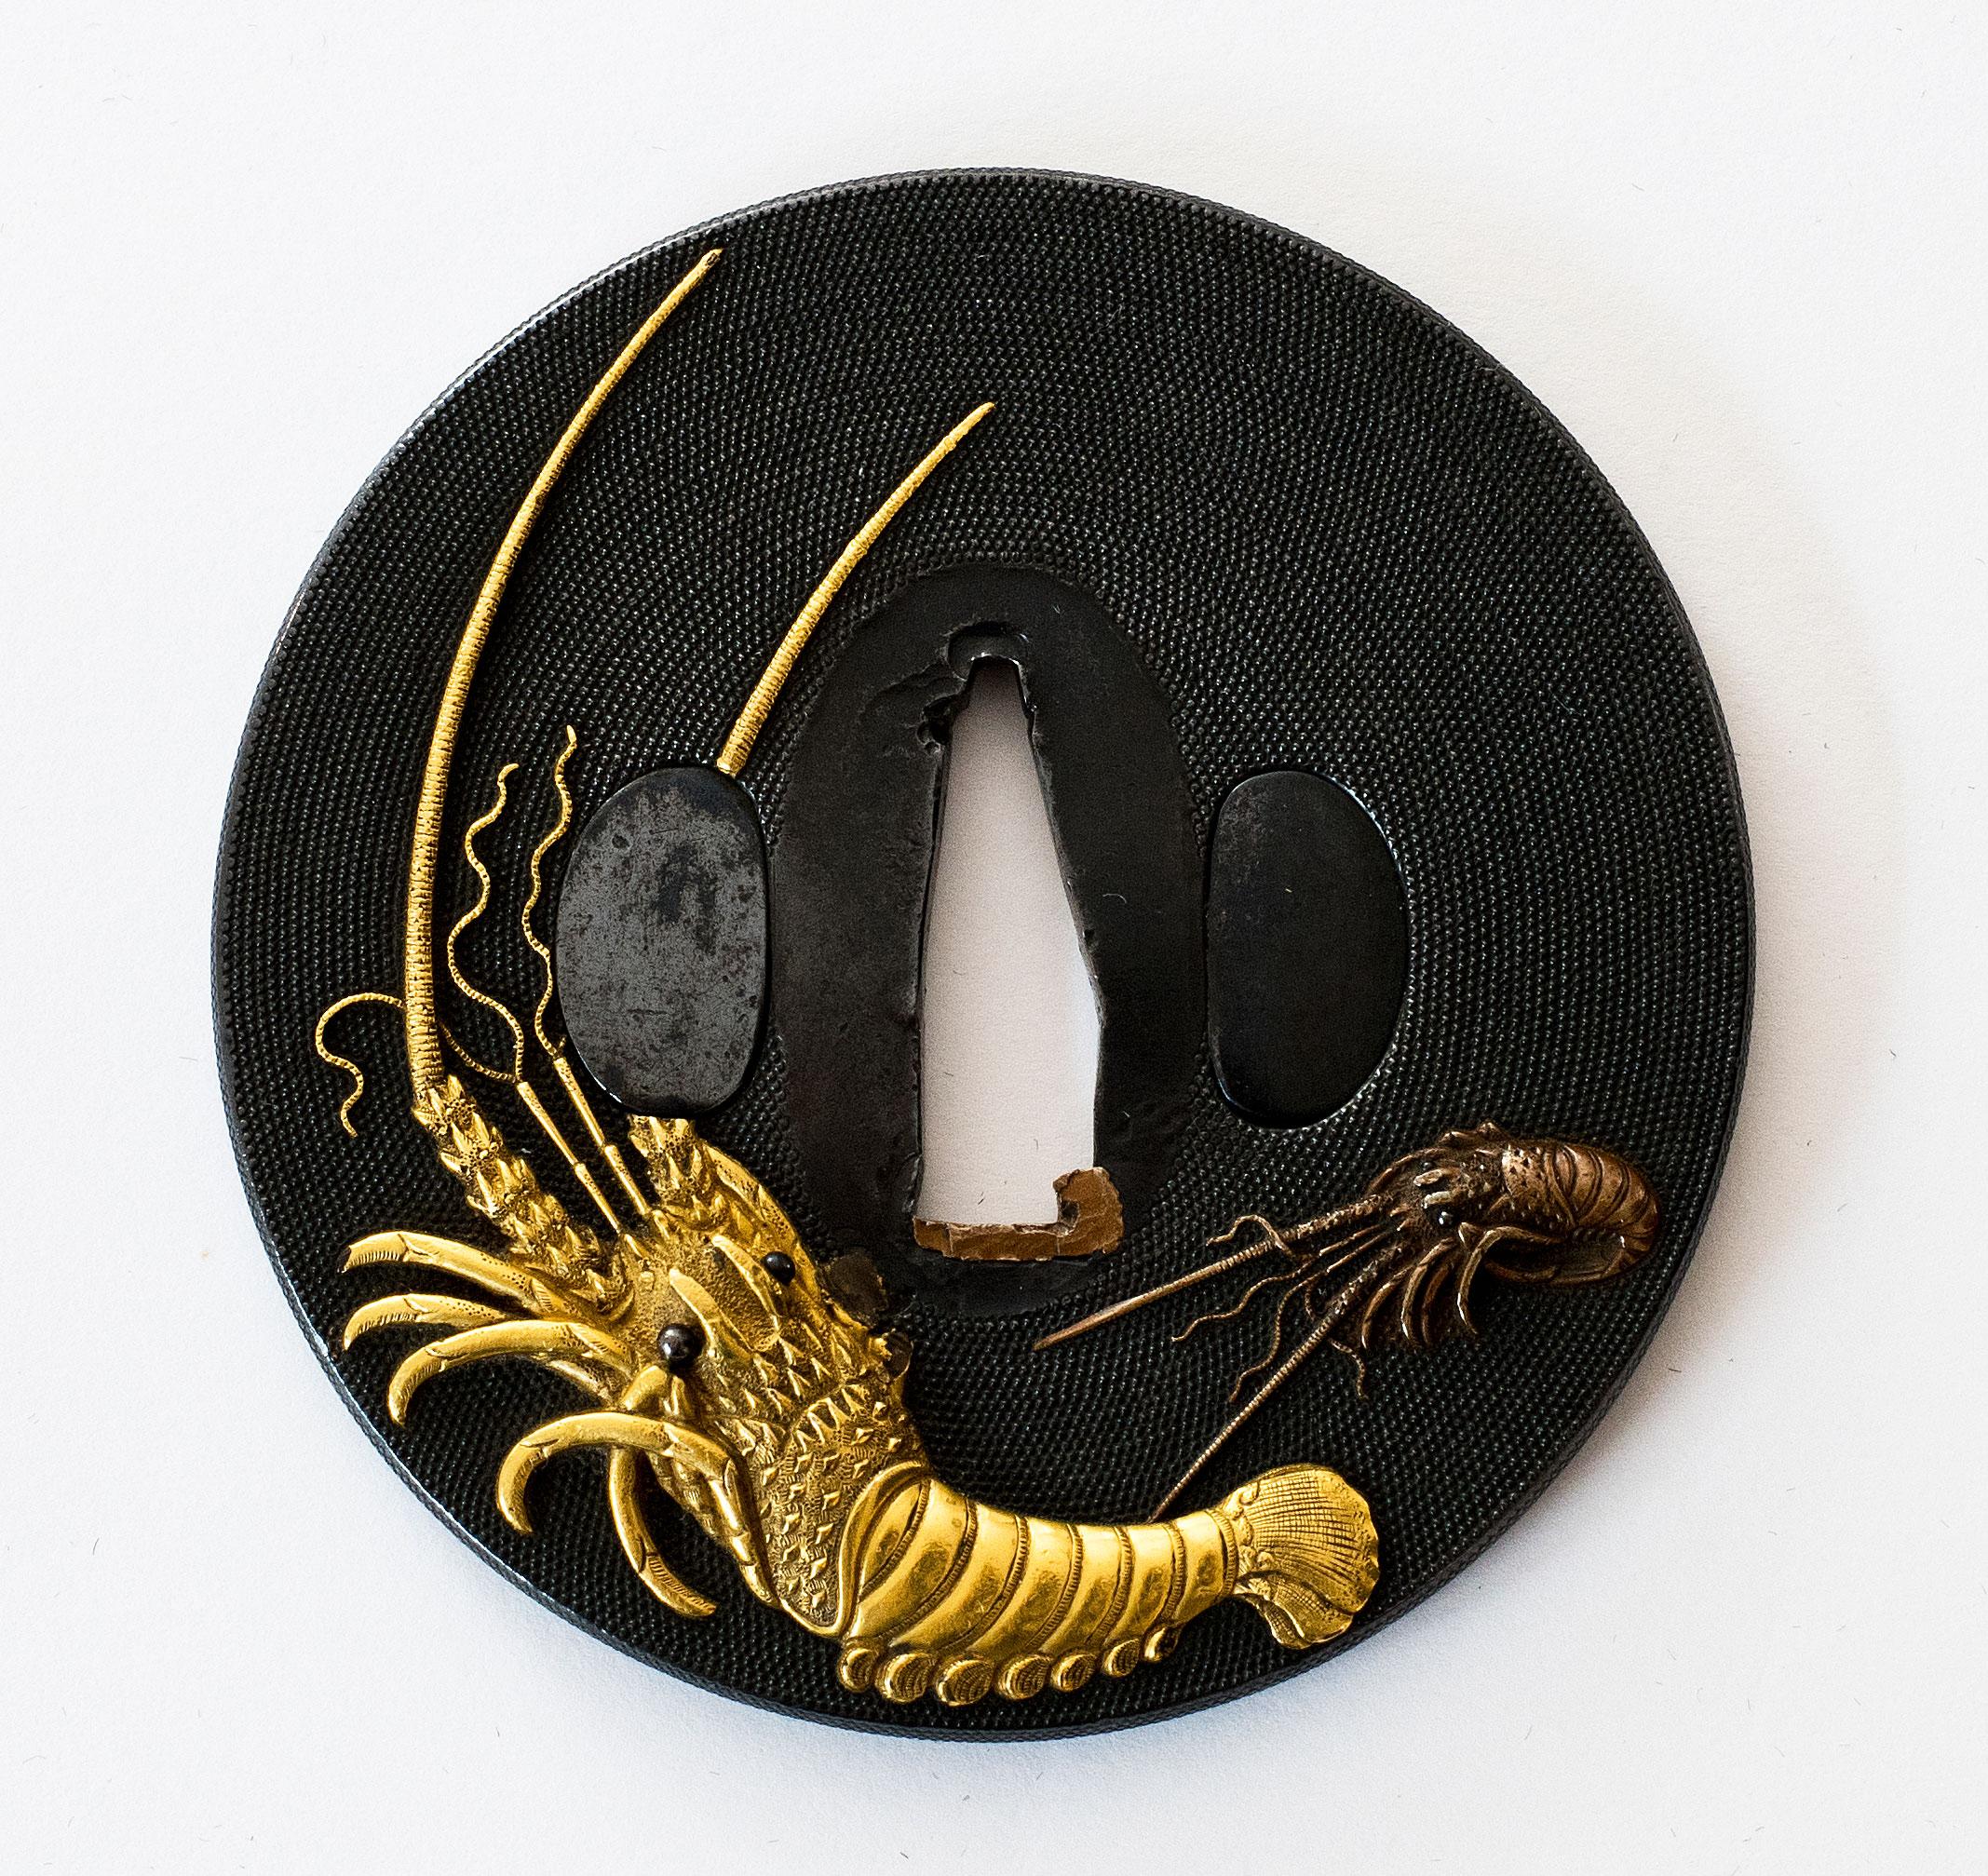 As part of our Japanese works of art collection we are delighted to offer this exceptionally fine Edo Period 1615-1868, mixed metal artist signed Tsuba ( sword hand guard), the well recorded artist Iwamoto Konkan has painstakingly manufactured a